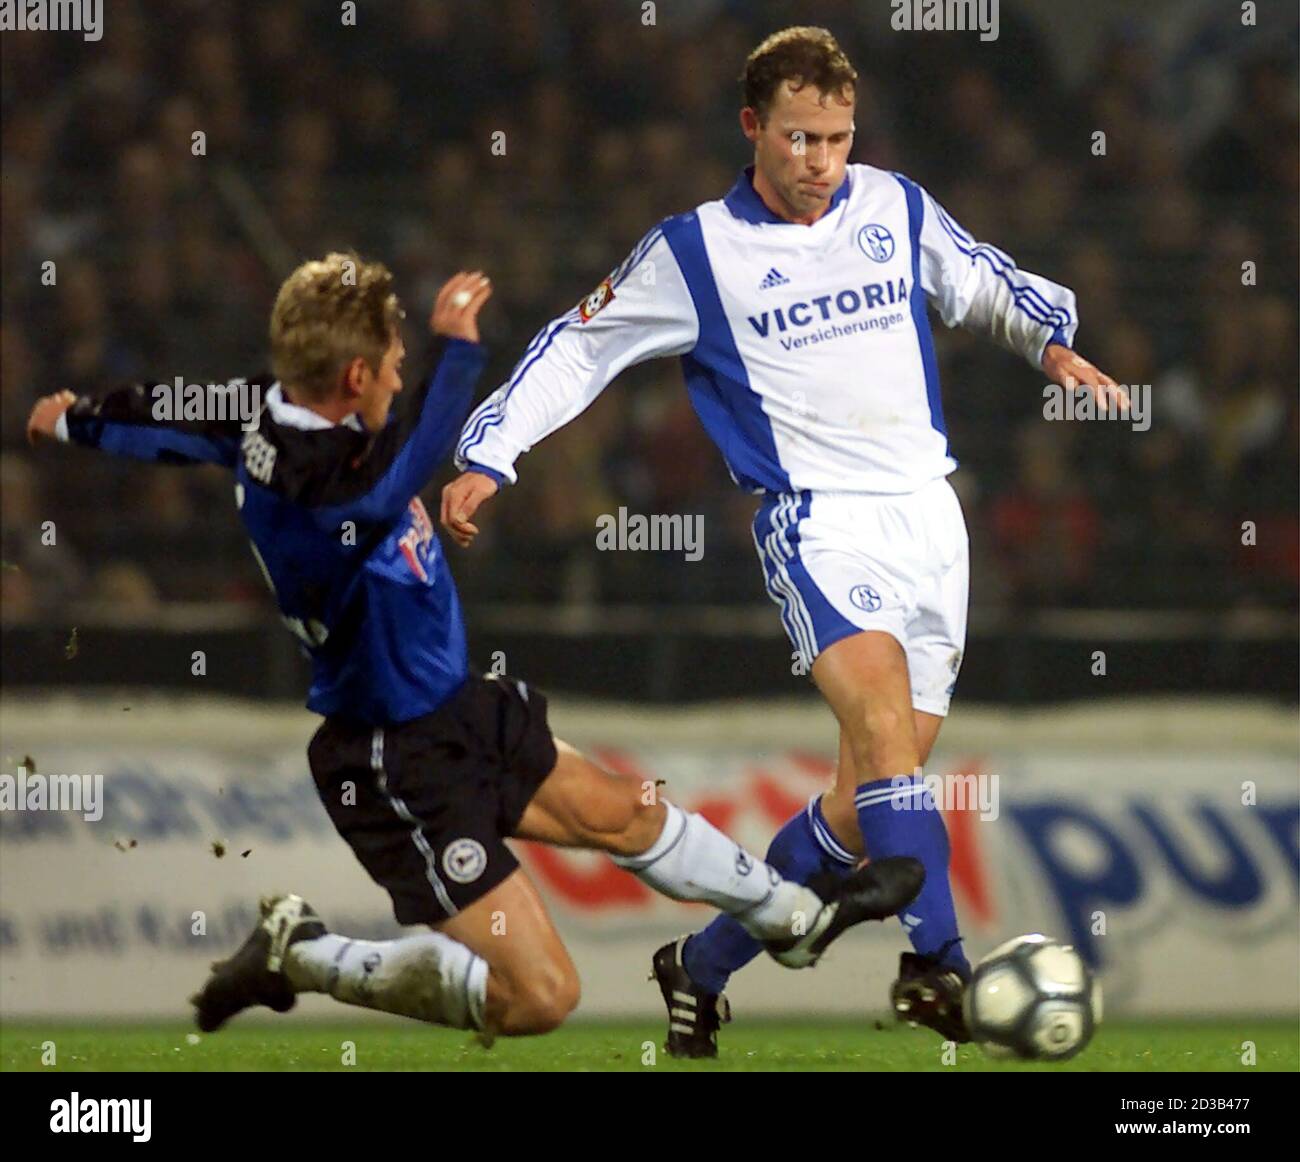 Arminia Bielefeld's Detlev Dammeier (L) tackles Schalke 04 Niels Oude  Kamphuis (R) from the Netherlands during the second round of the German  Soccer Cup in Bielefeld, November 27, 2001. REUTERS/Ina Fassbender INA/CRB